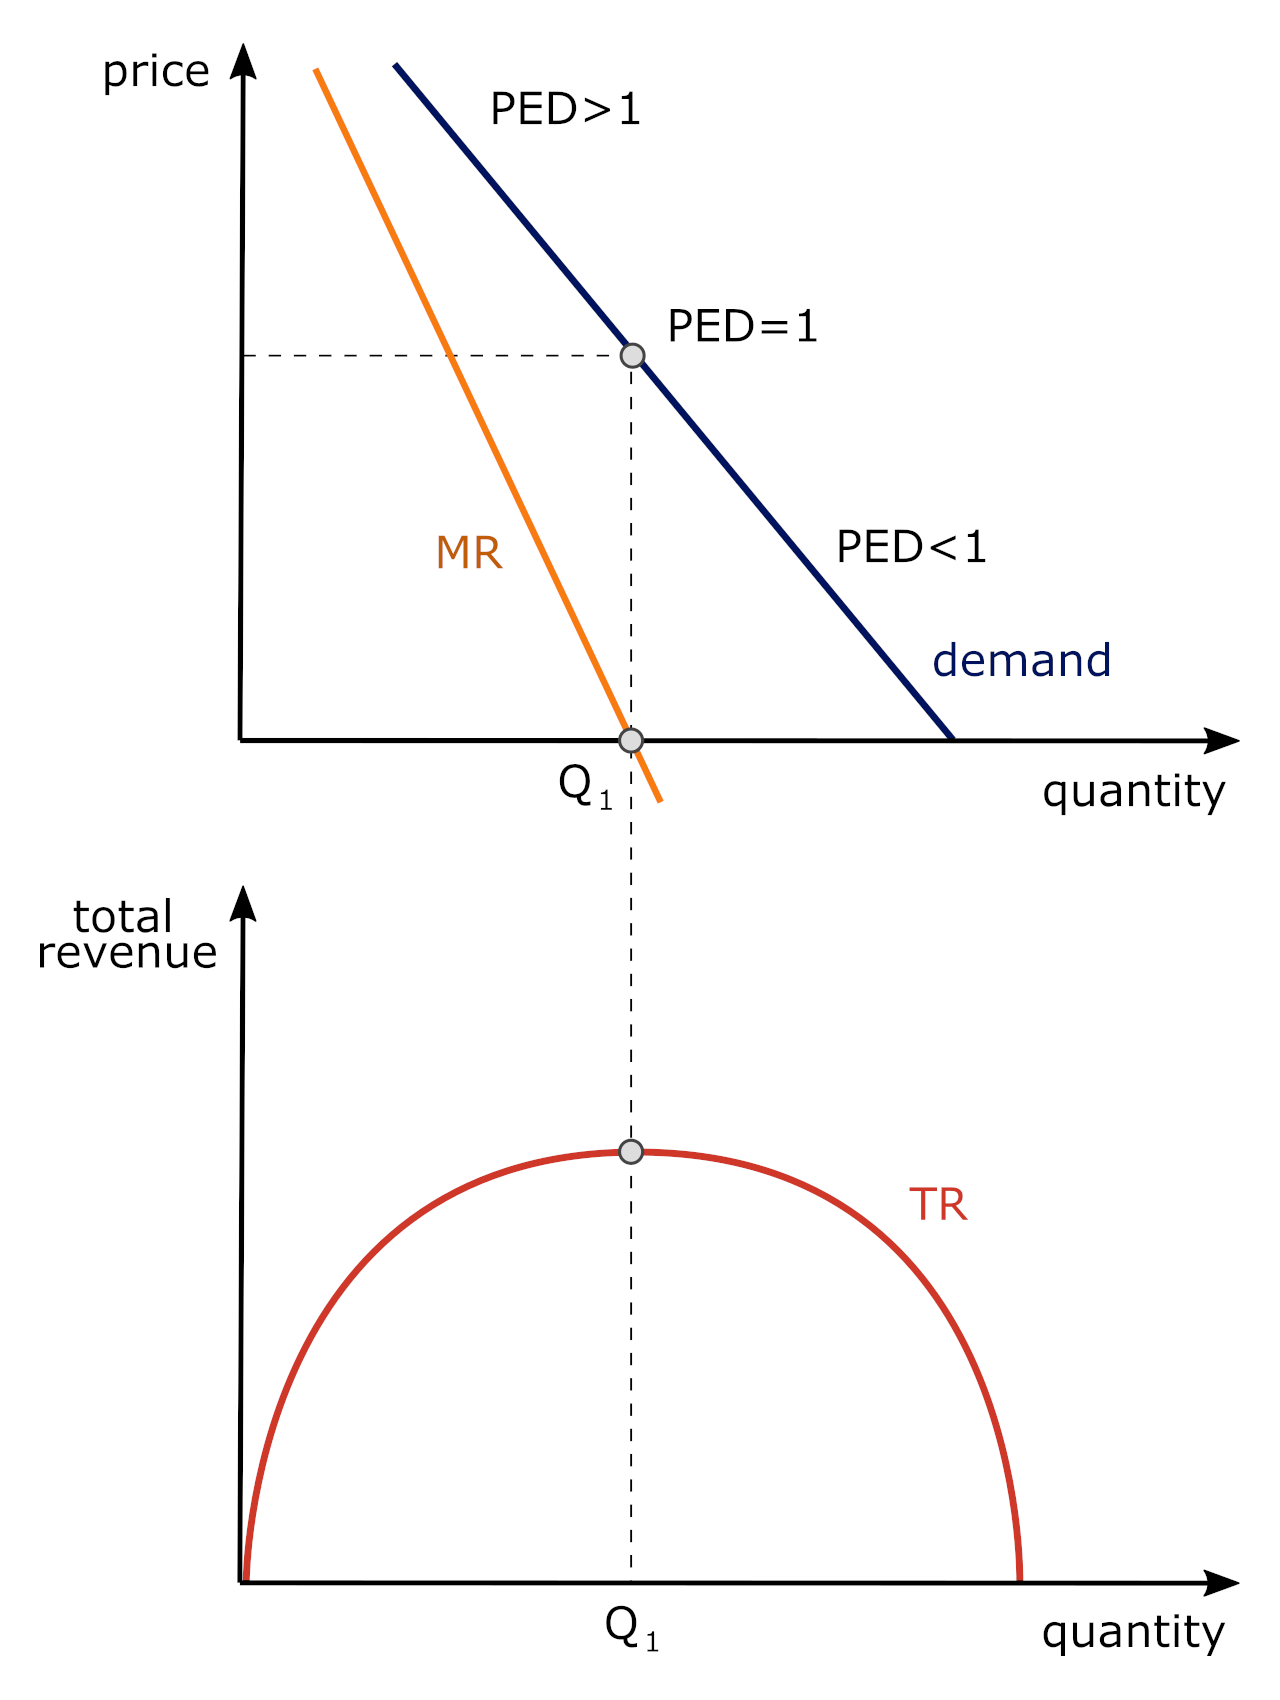 Illustration of the impact on total revenue as price and demand chang